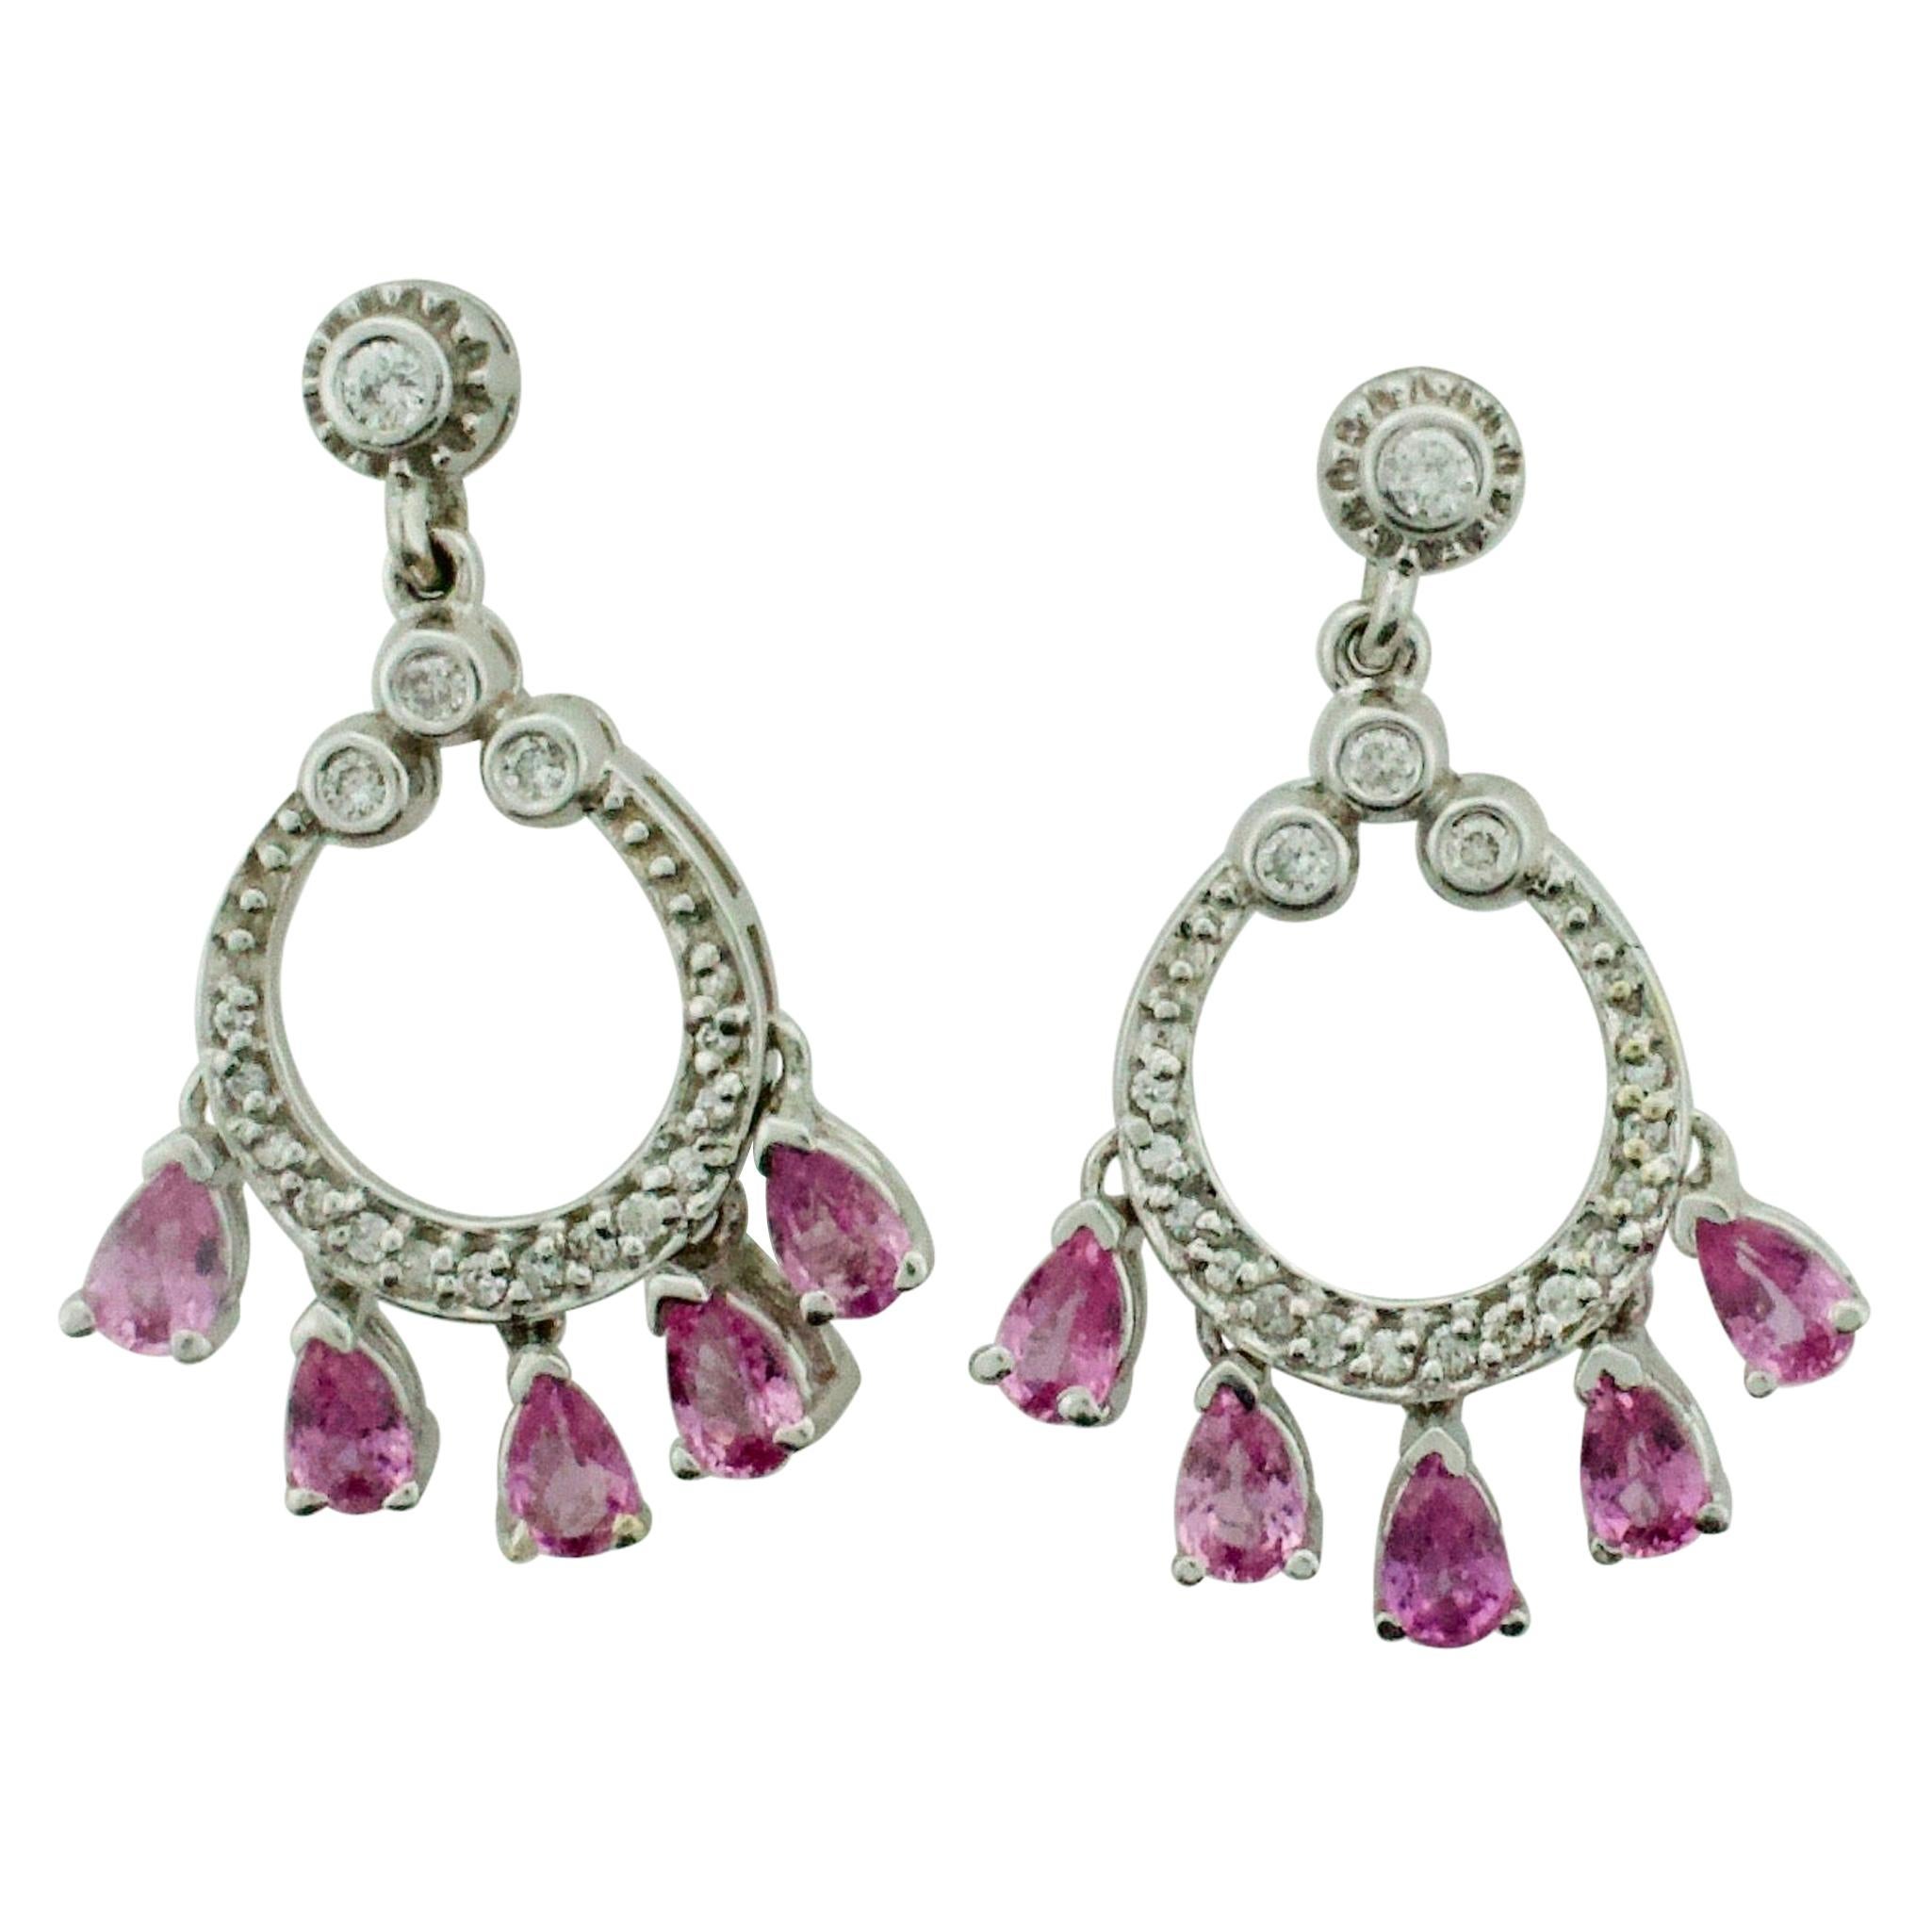 Dangling Pink Sapphire and Diamond Earrings in White Gold